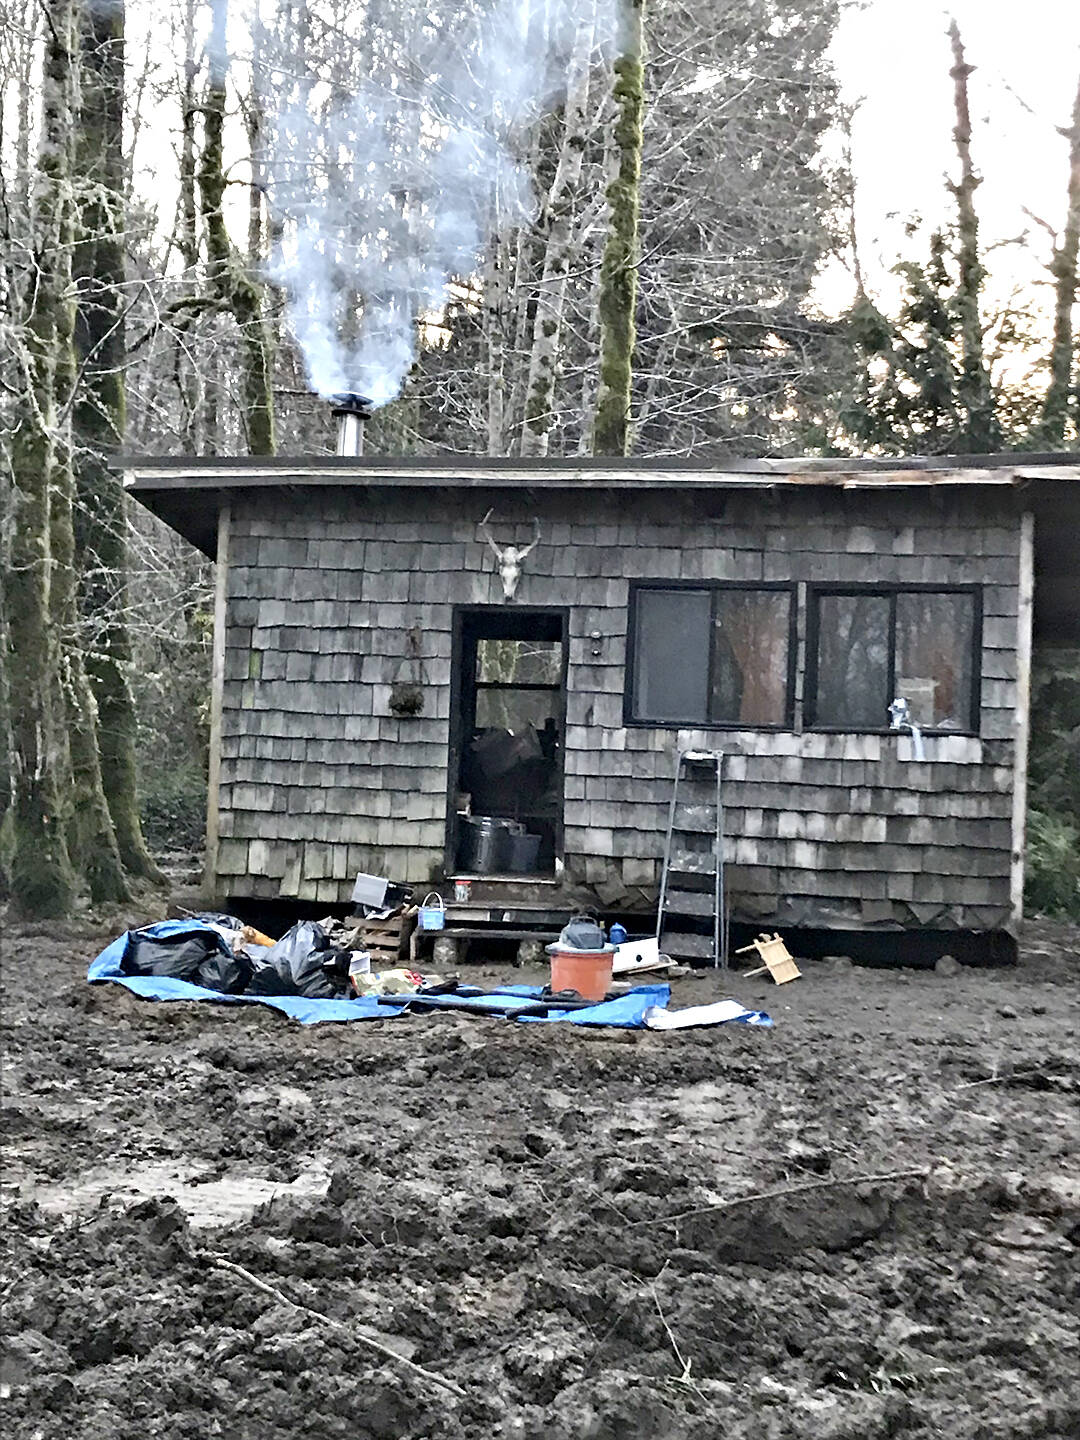 Chip Keen
Kory and Jolene Hitt pulled this cabin back from the edge after floods almost sent it into the Qullayute River.